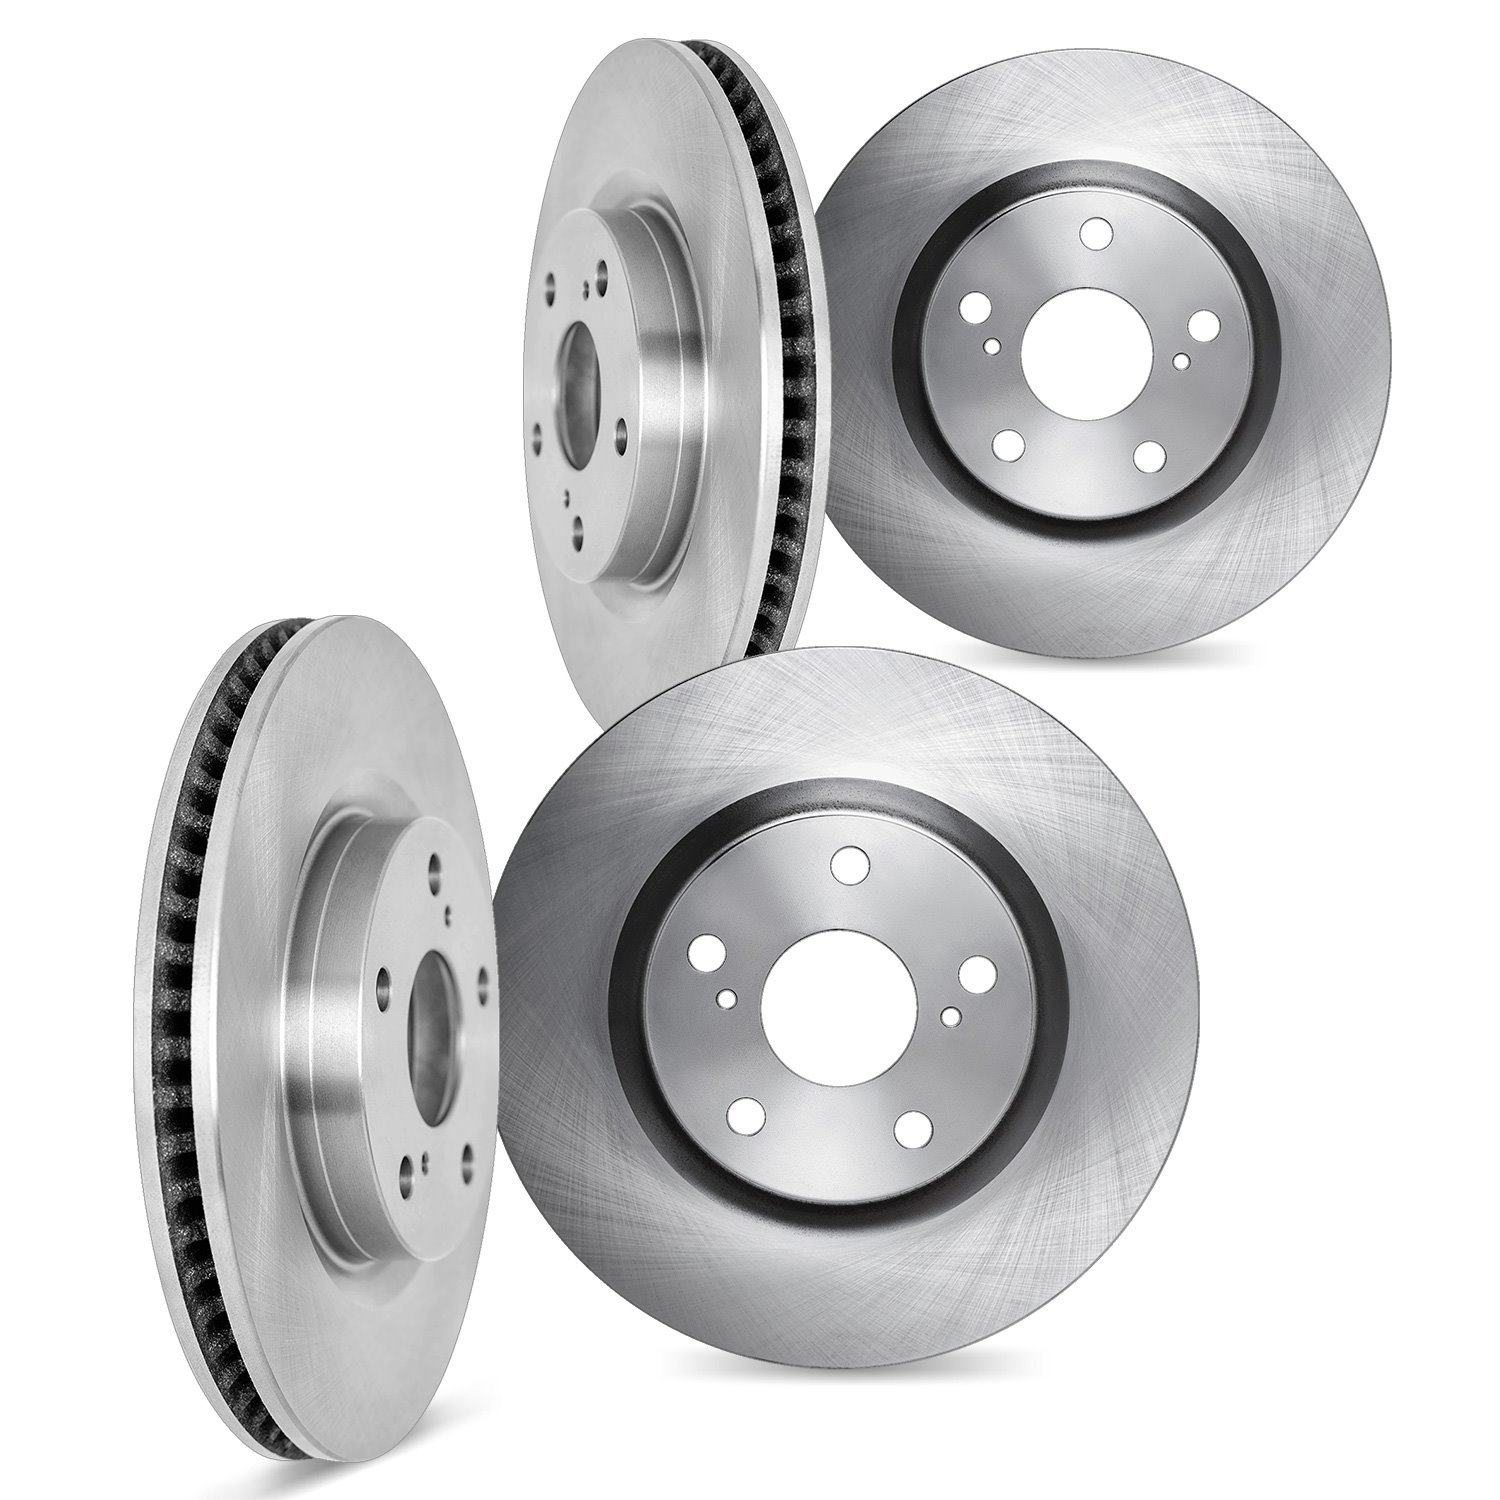 6004-11059 Brake Rotors, Fits Select Land Rover, Position: Front and Rear